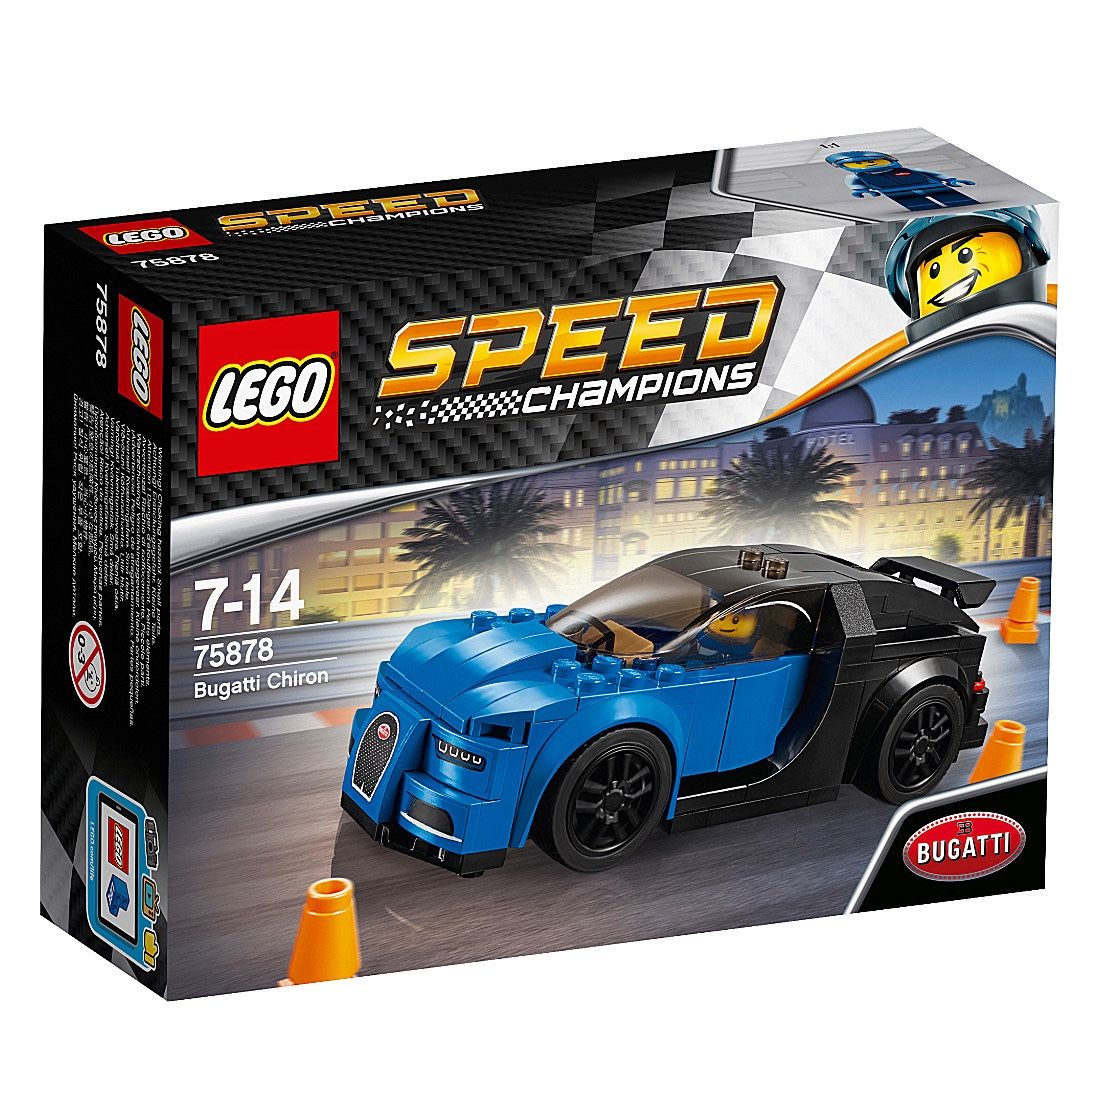 9 Best Lego Cars for 2018 - Fun Lego Car Sets for Kids & Car Enthusiasts